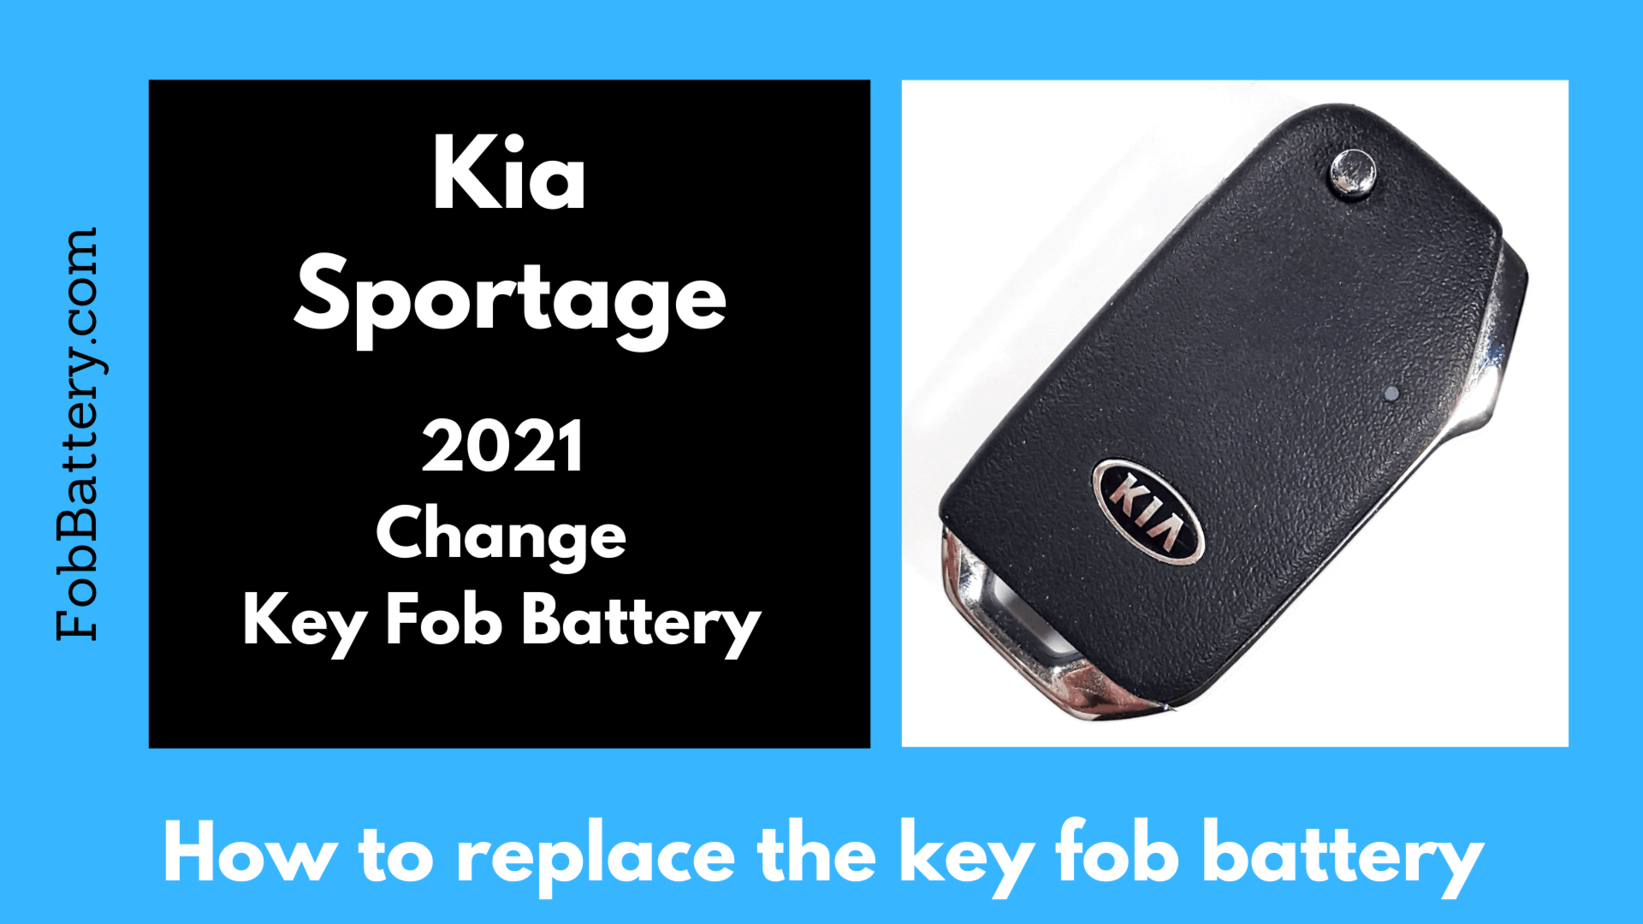 Kia Sportage key fob battery replacement guide